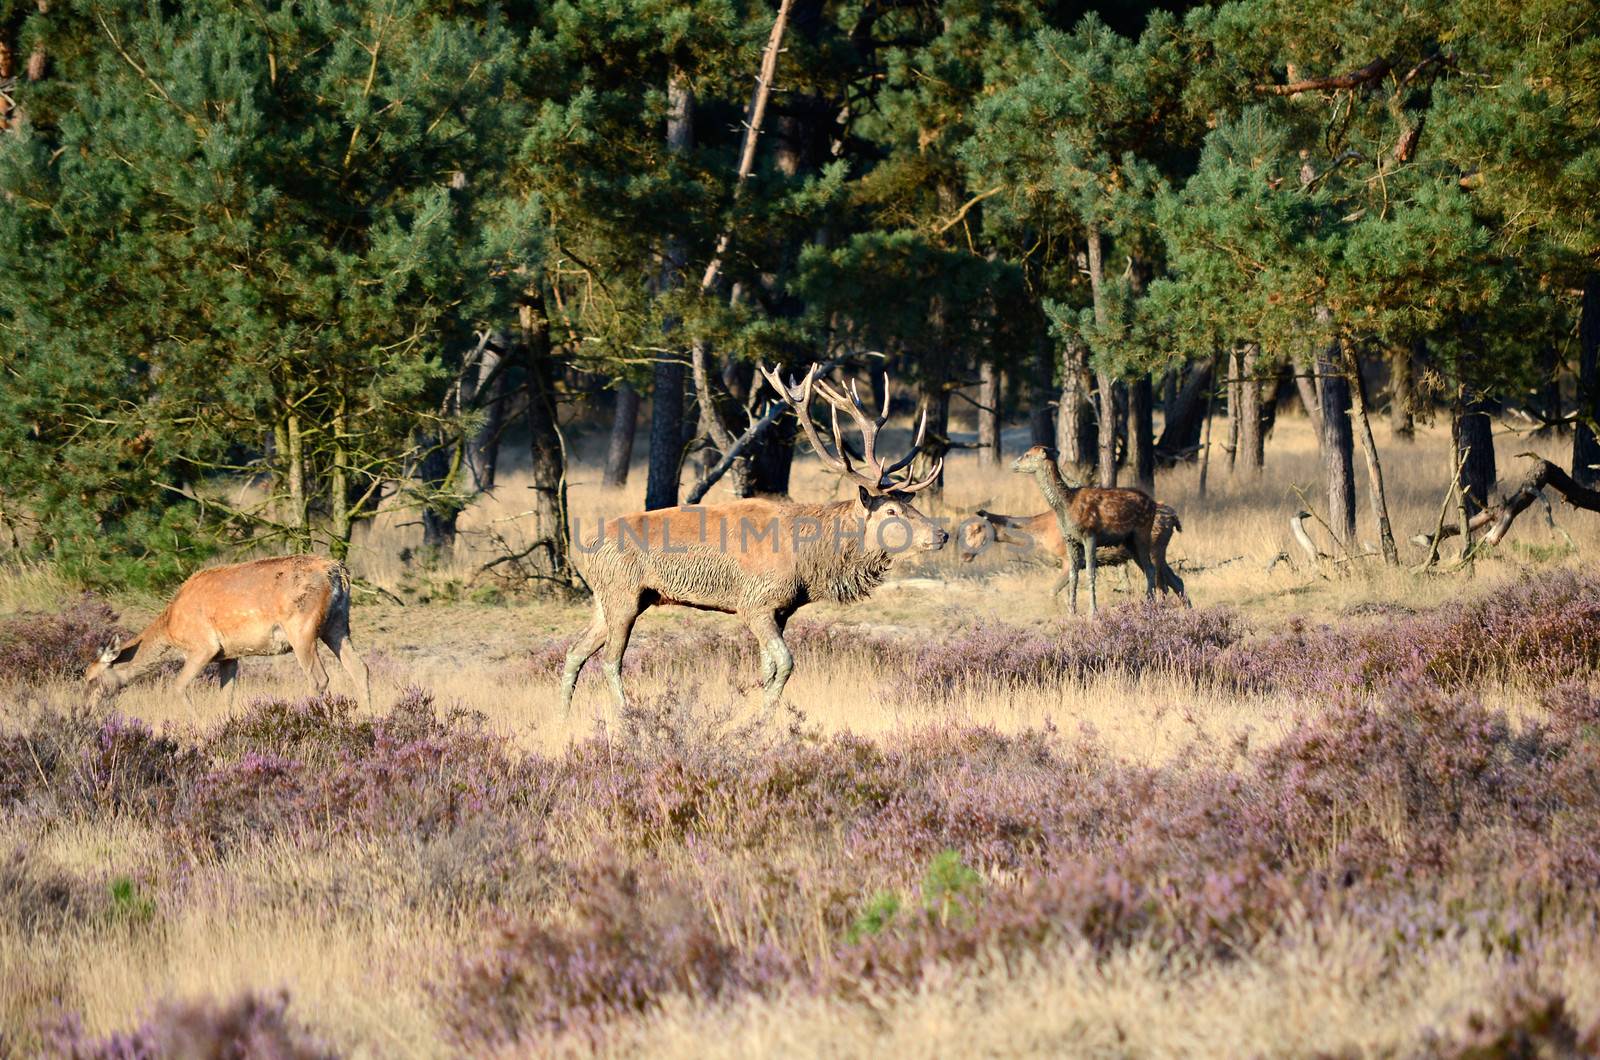 Male red deer (Cervus elaphus) with his females (hinds) in the forest during the rut in national park Hoge Veluwe in the Netherlands.